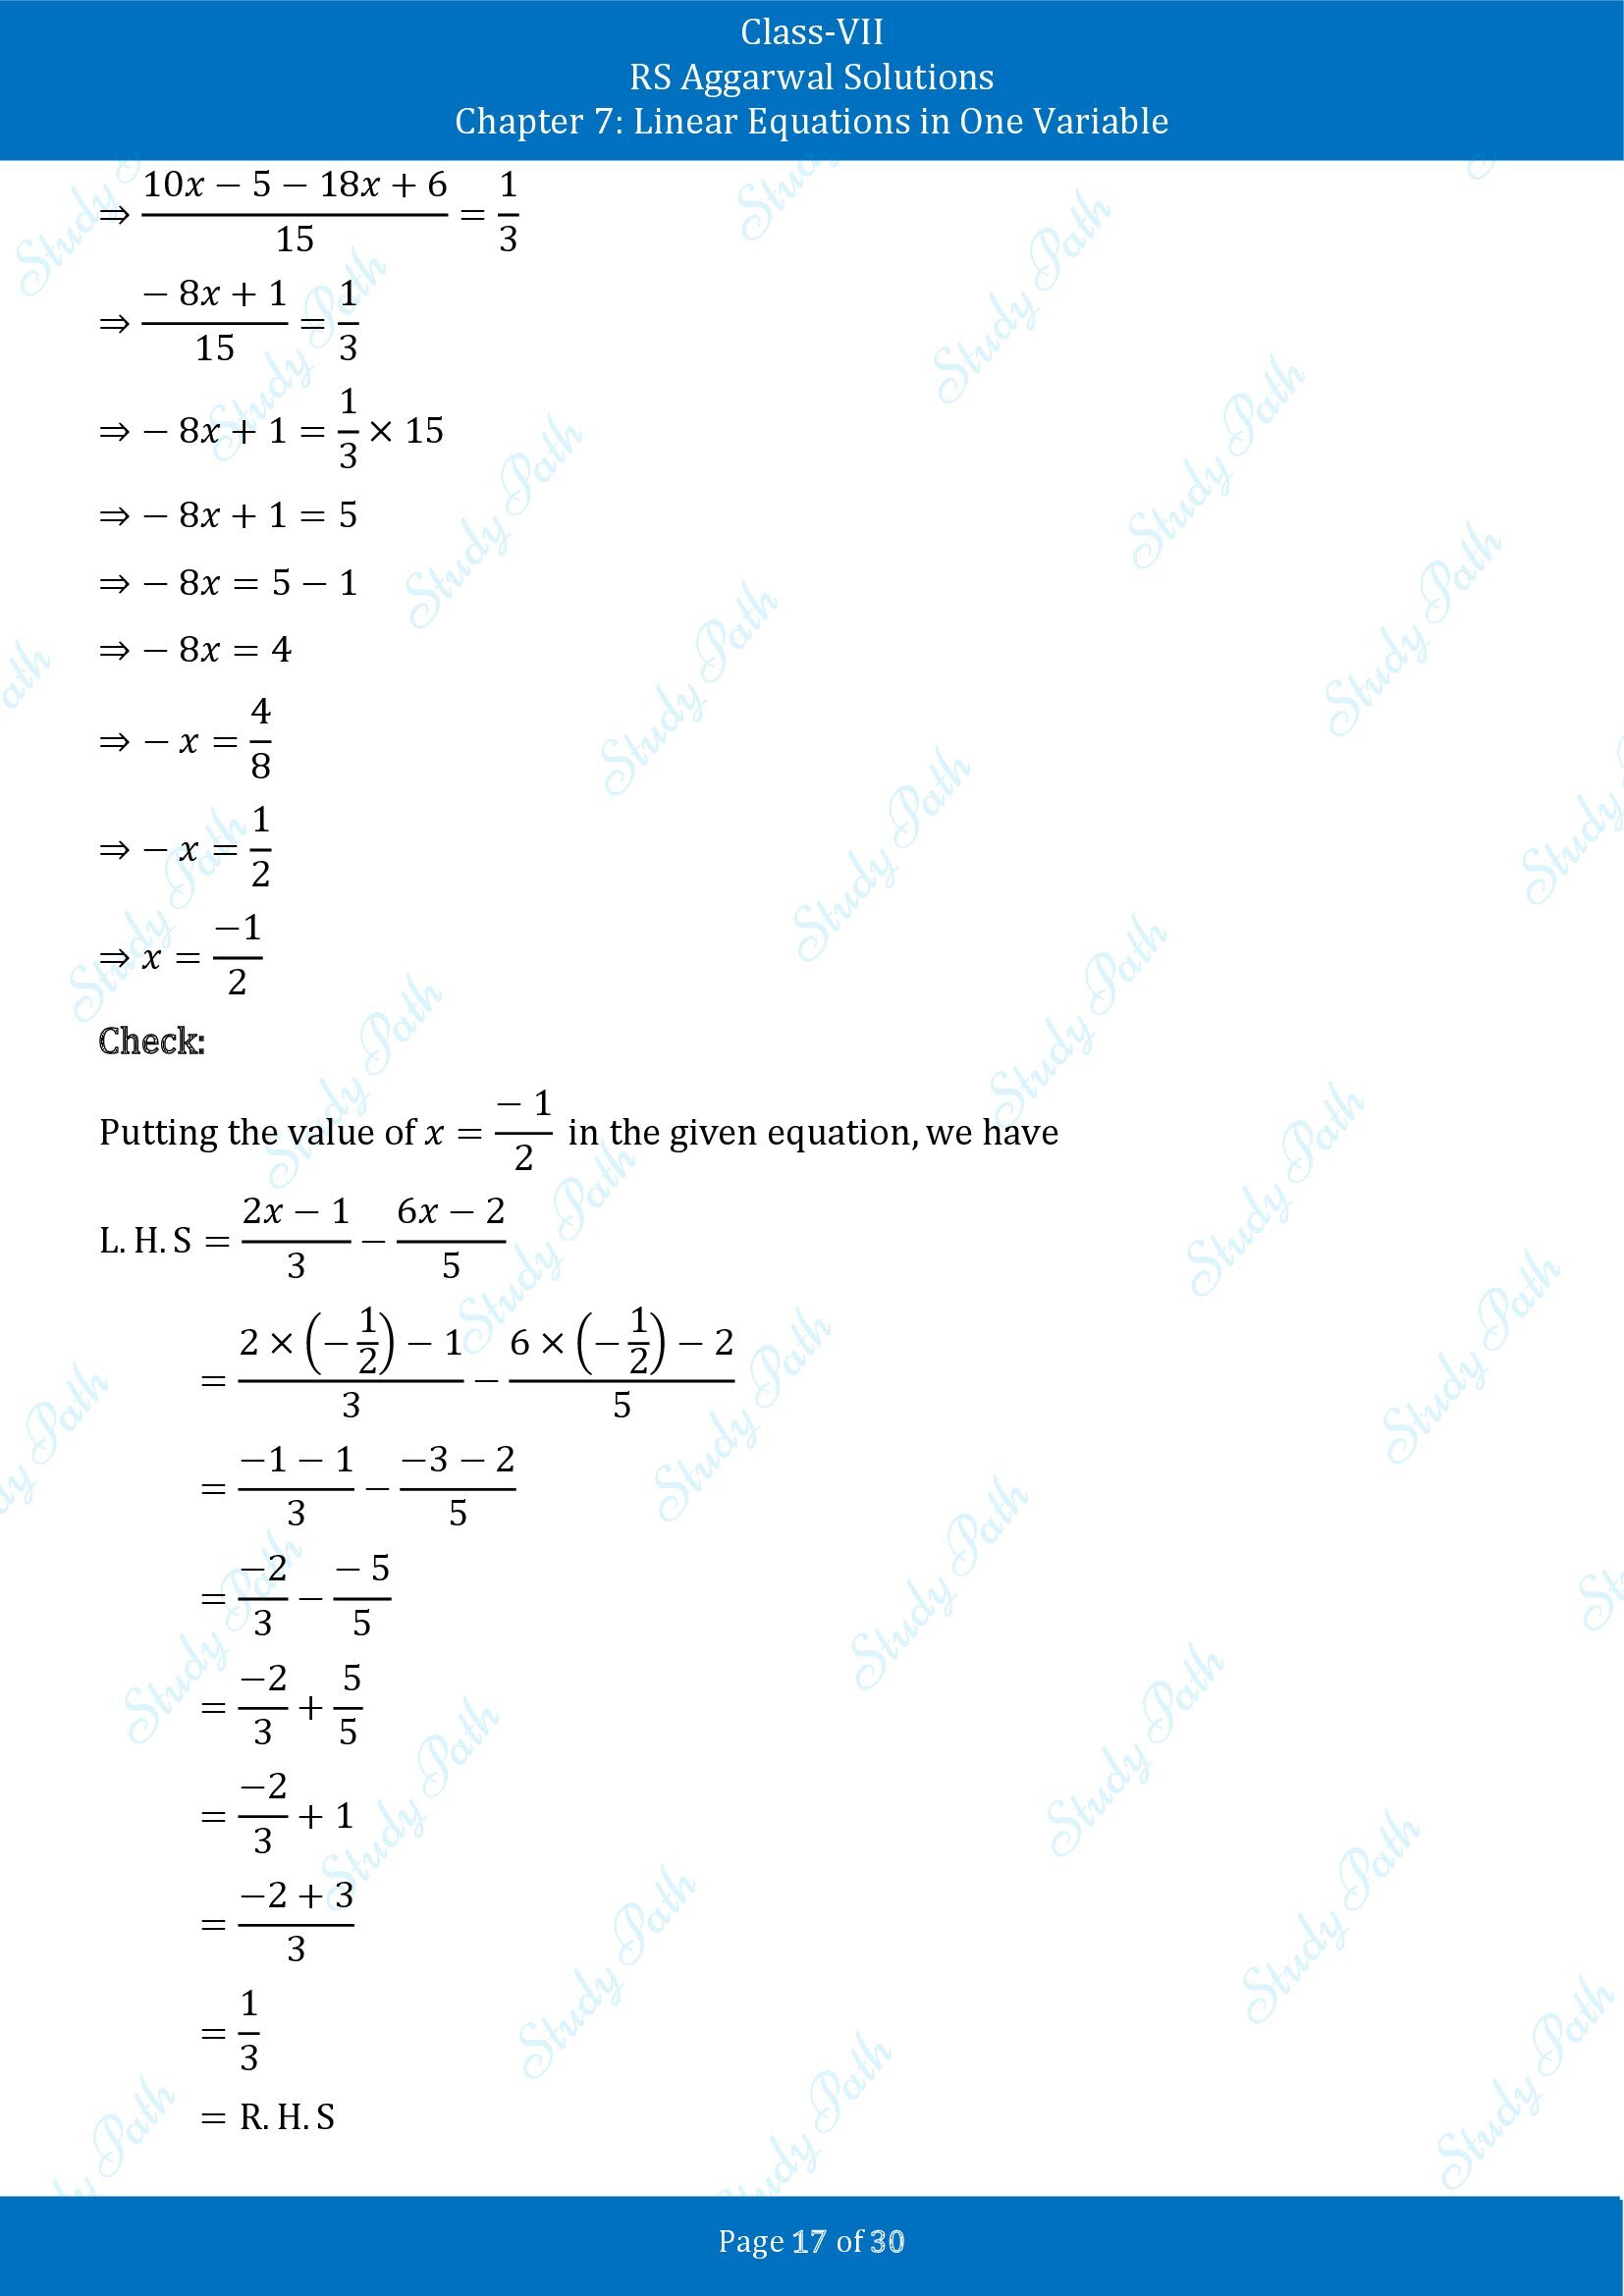 RS Aggarwal Solutions Class 7 Chapter 7 Linear Equations in One Variable Exercise 7A 00017